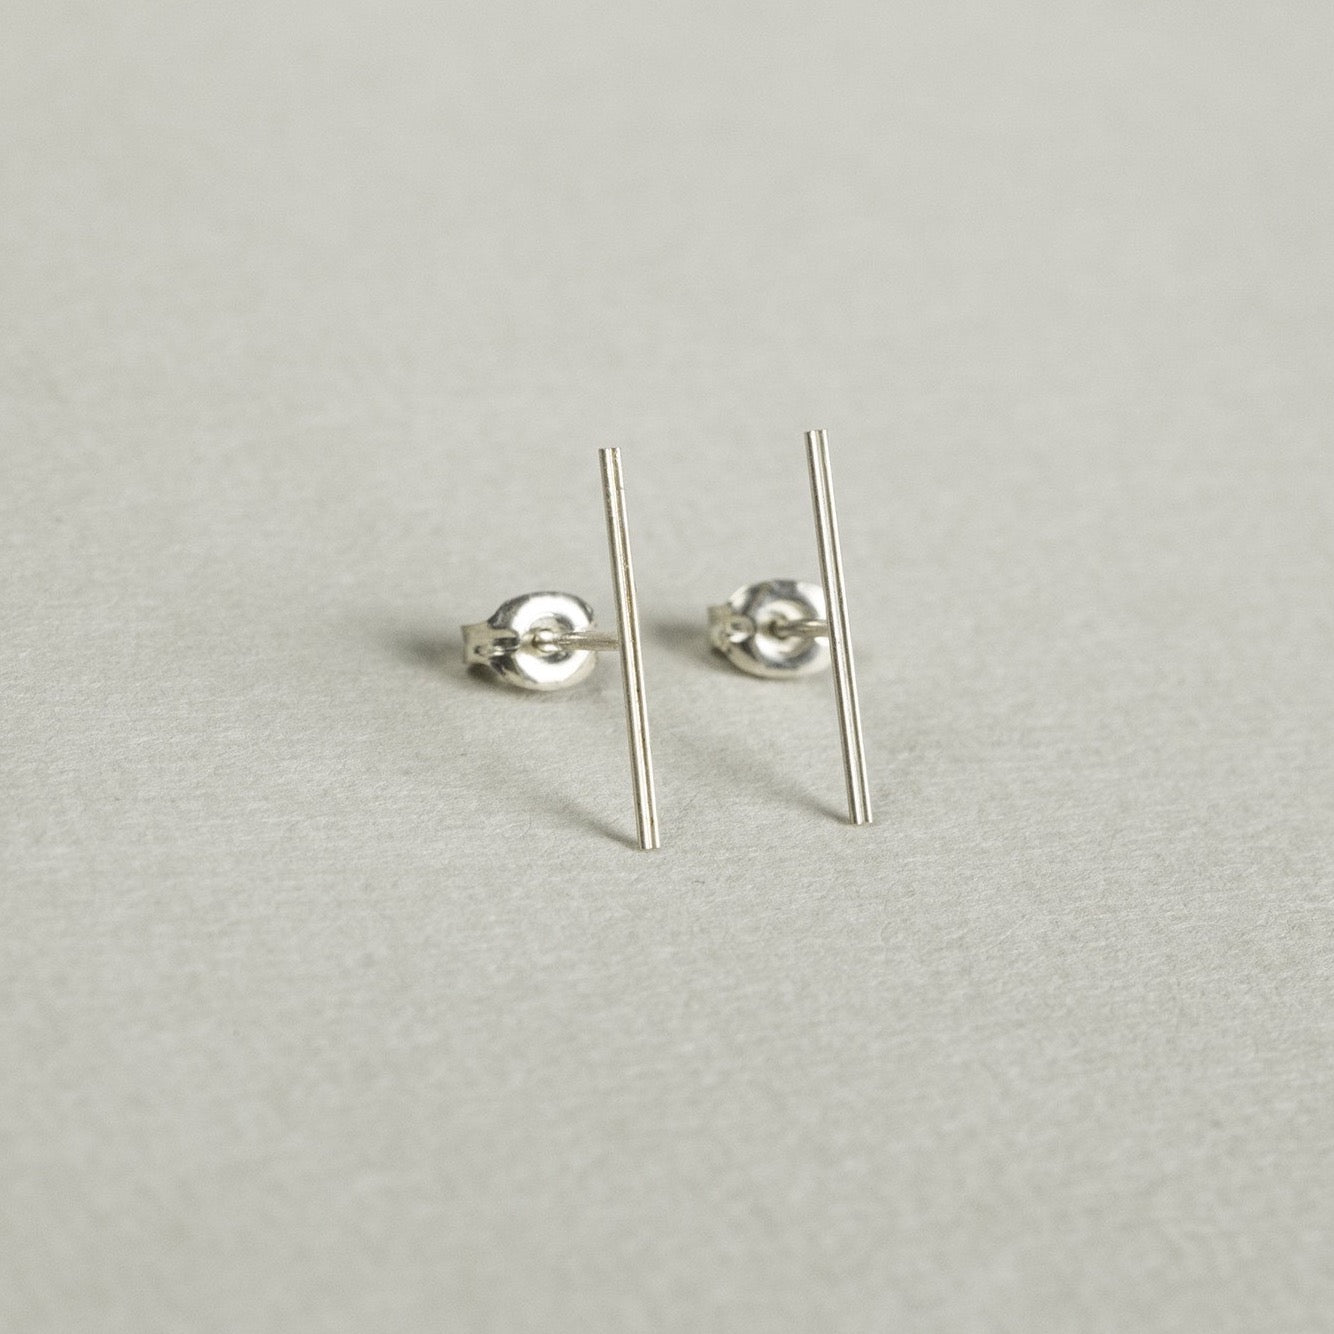 silver double line studs are perfect earrings for those who like understated look